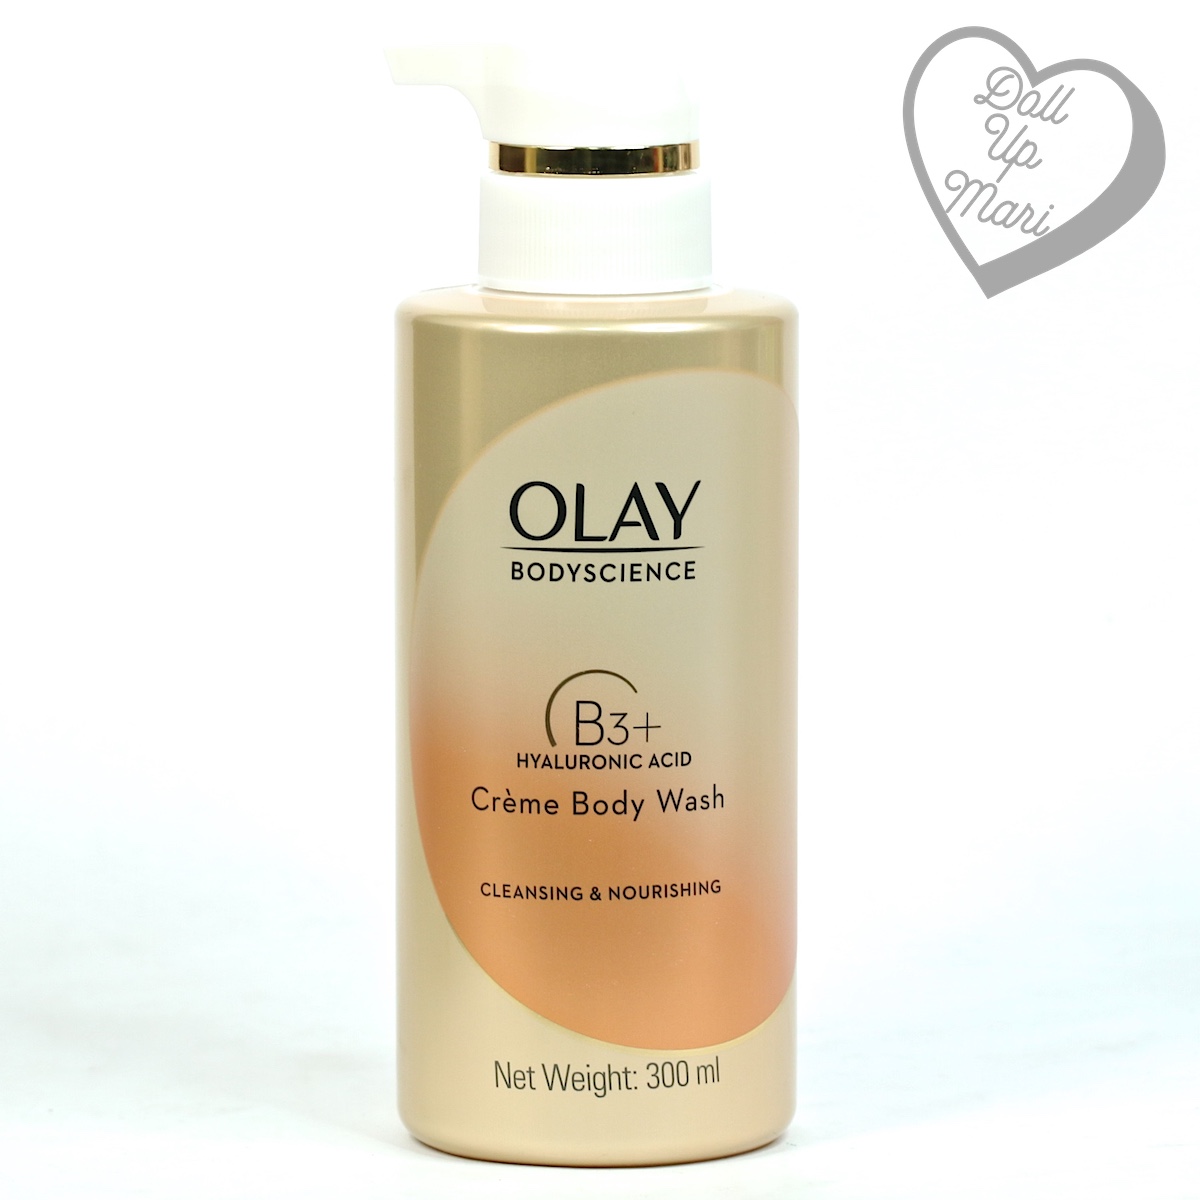 Olay BodyScience Crème Body Wash Cleansing and Nourishing with Hyaluronic Acid Pack shot